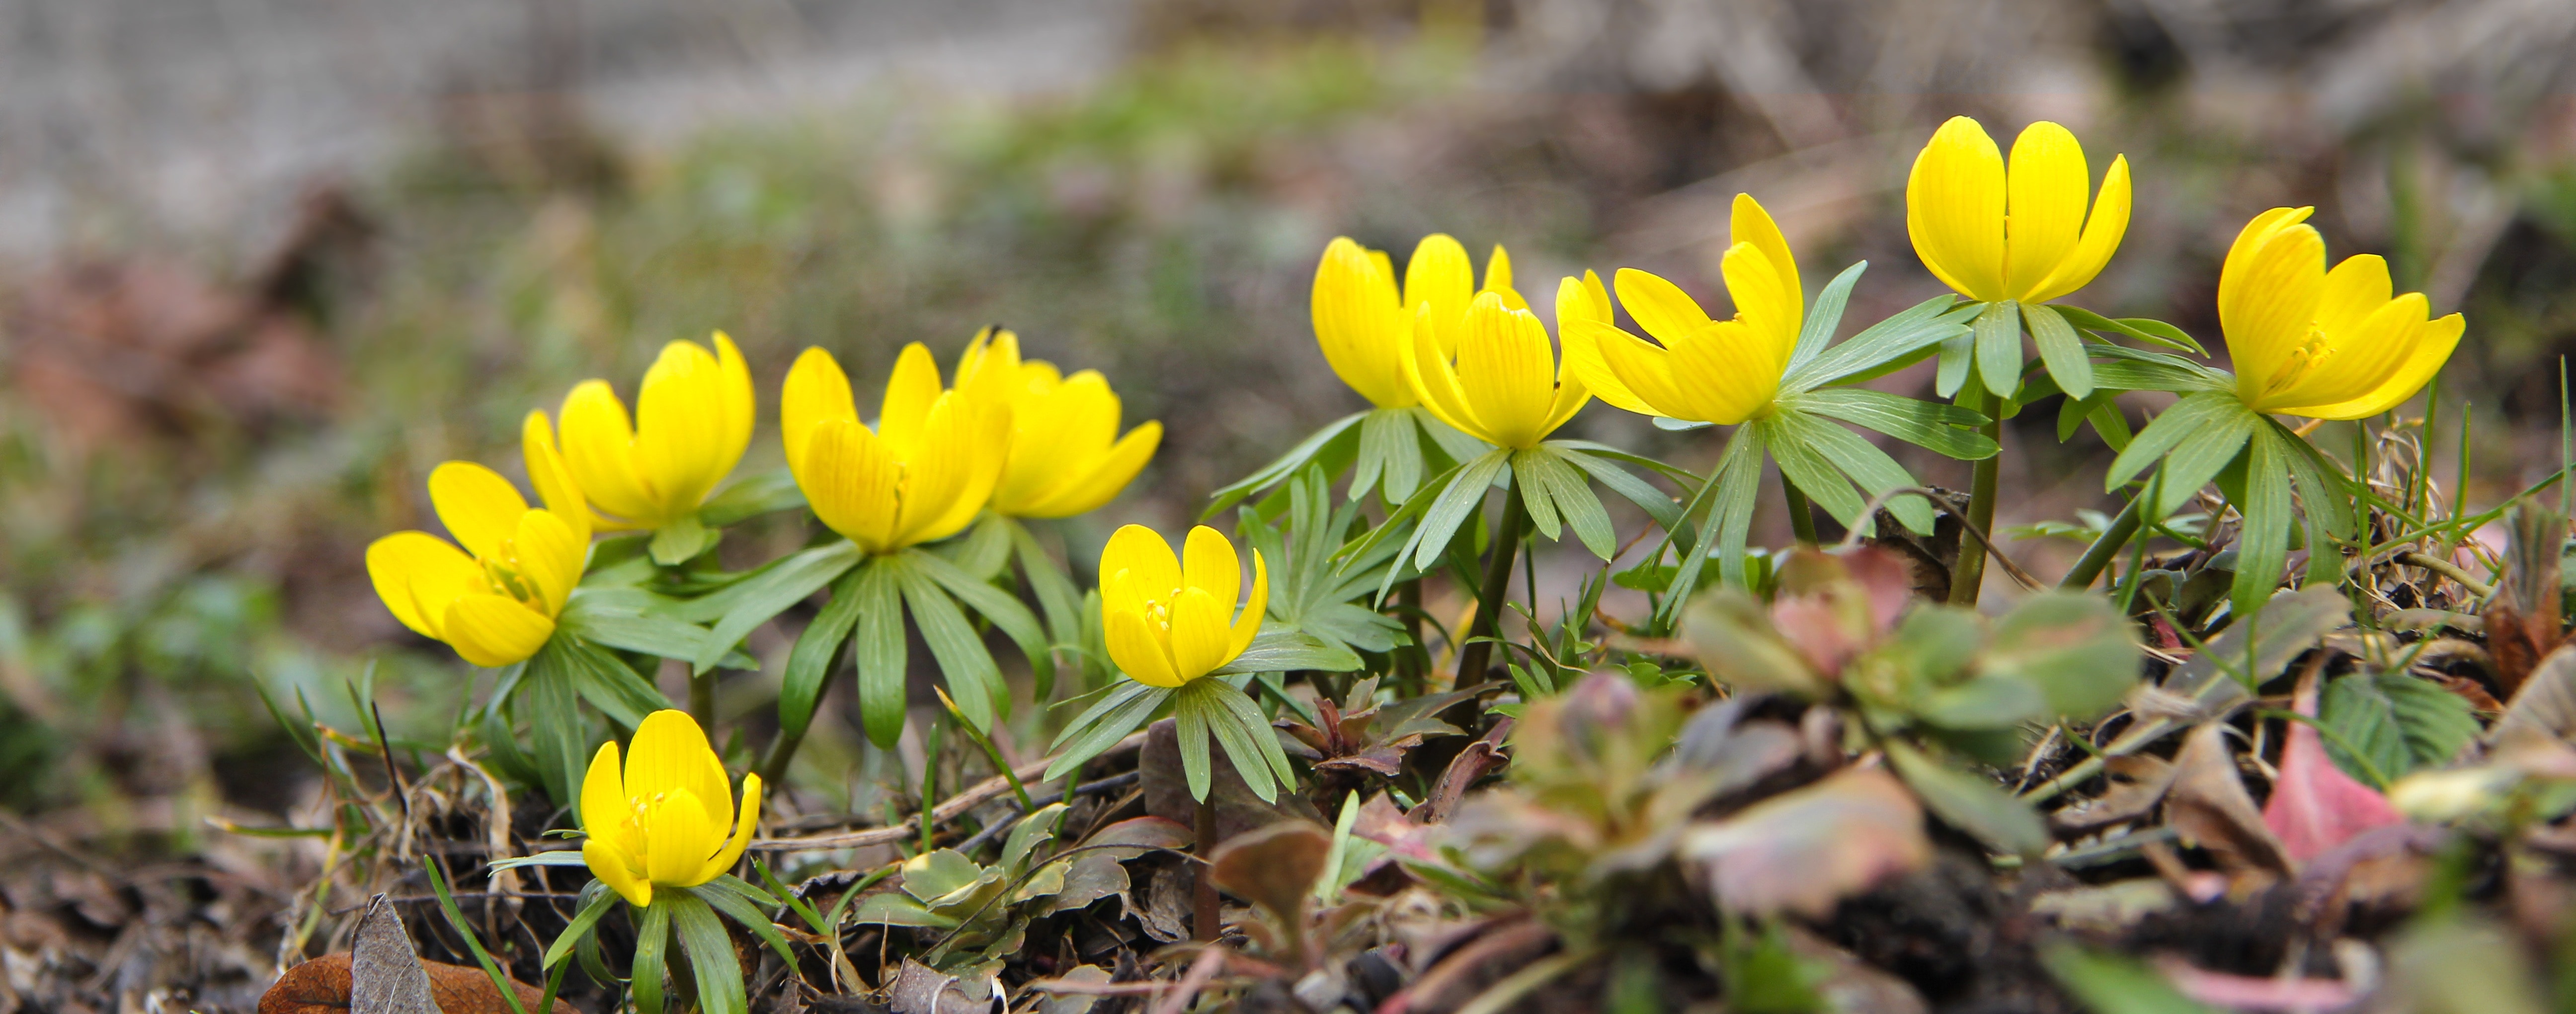 yellow small petaled flowers